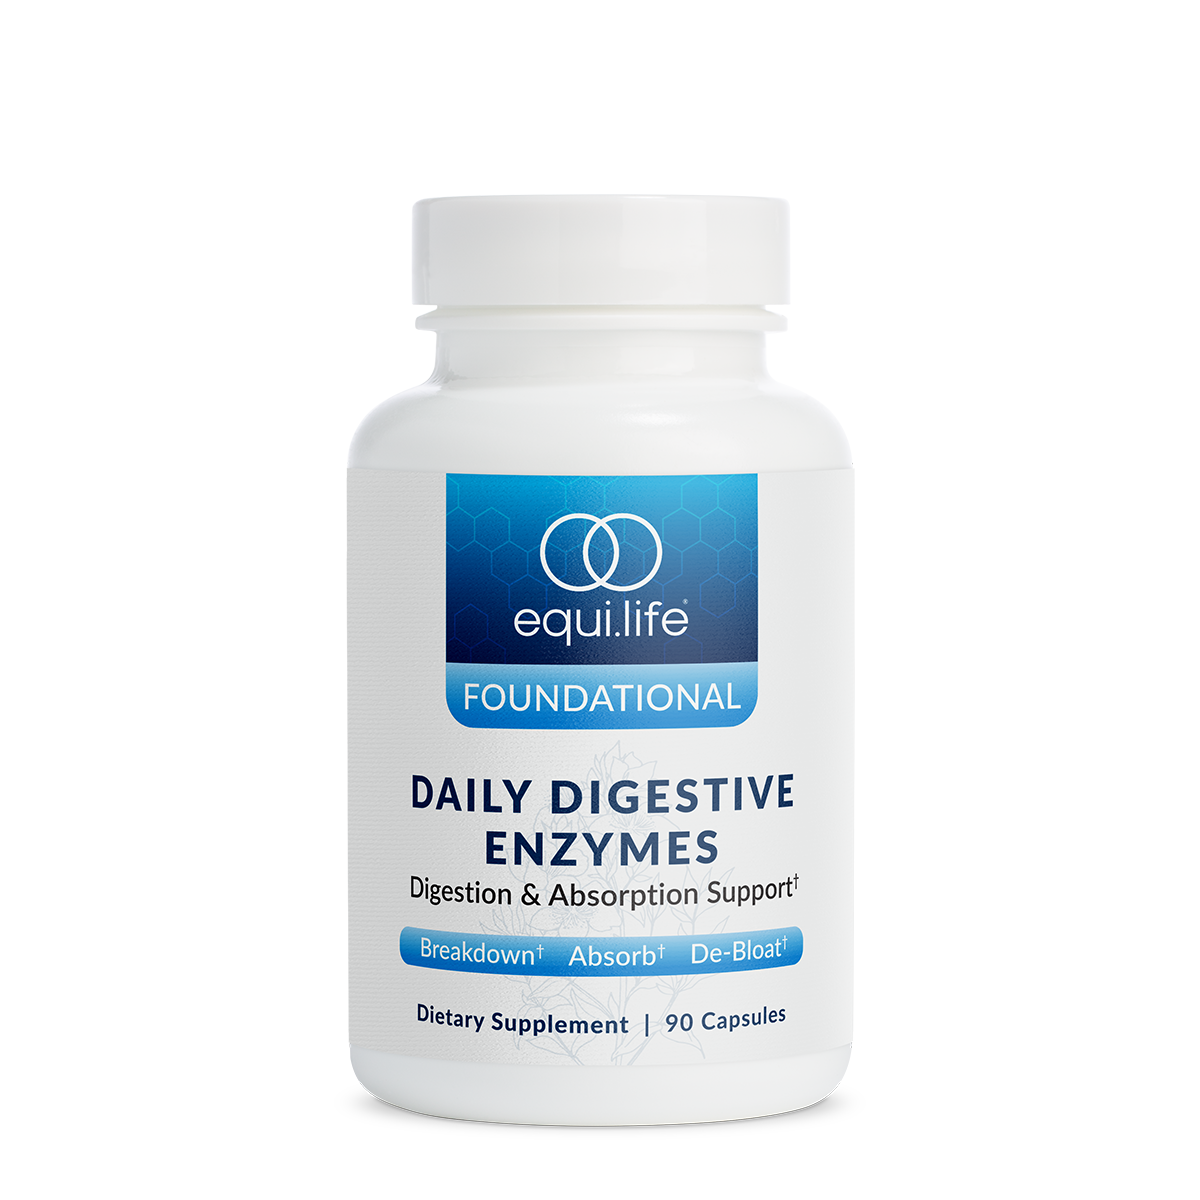 Daily Digestive Enzyme